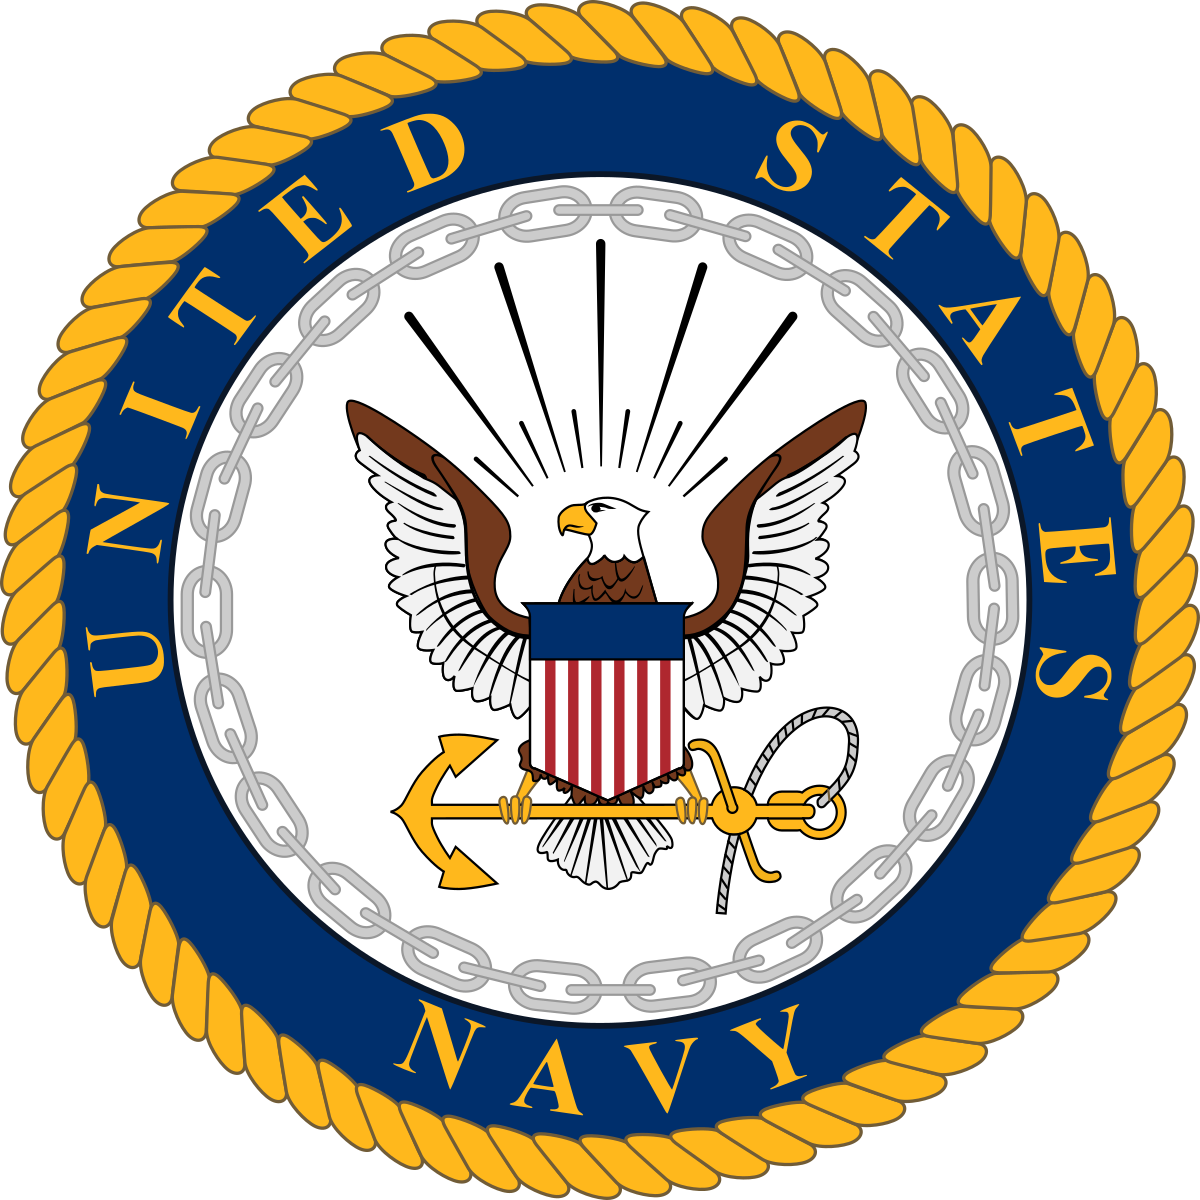 1200px-Emblem_of_the_United_States_Navy.svg.png